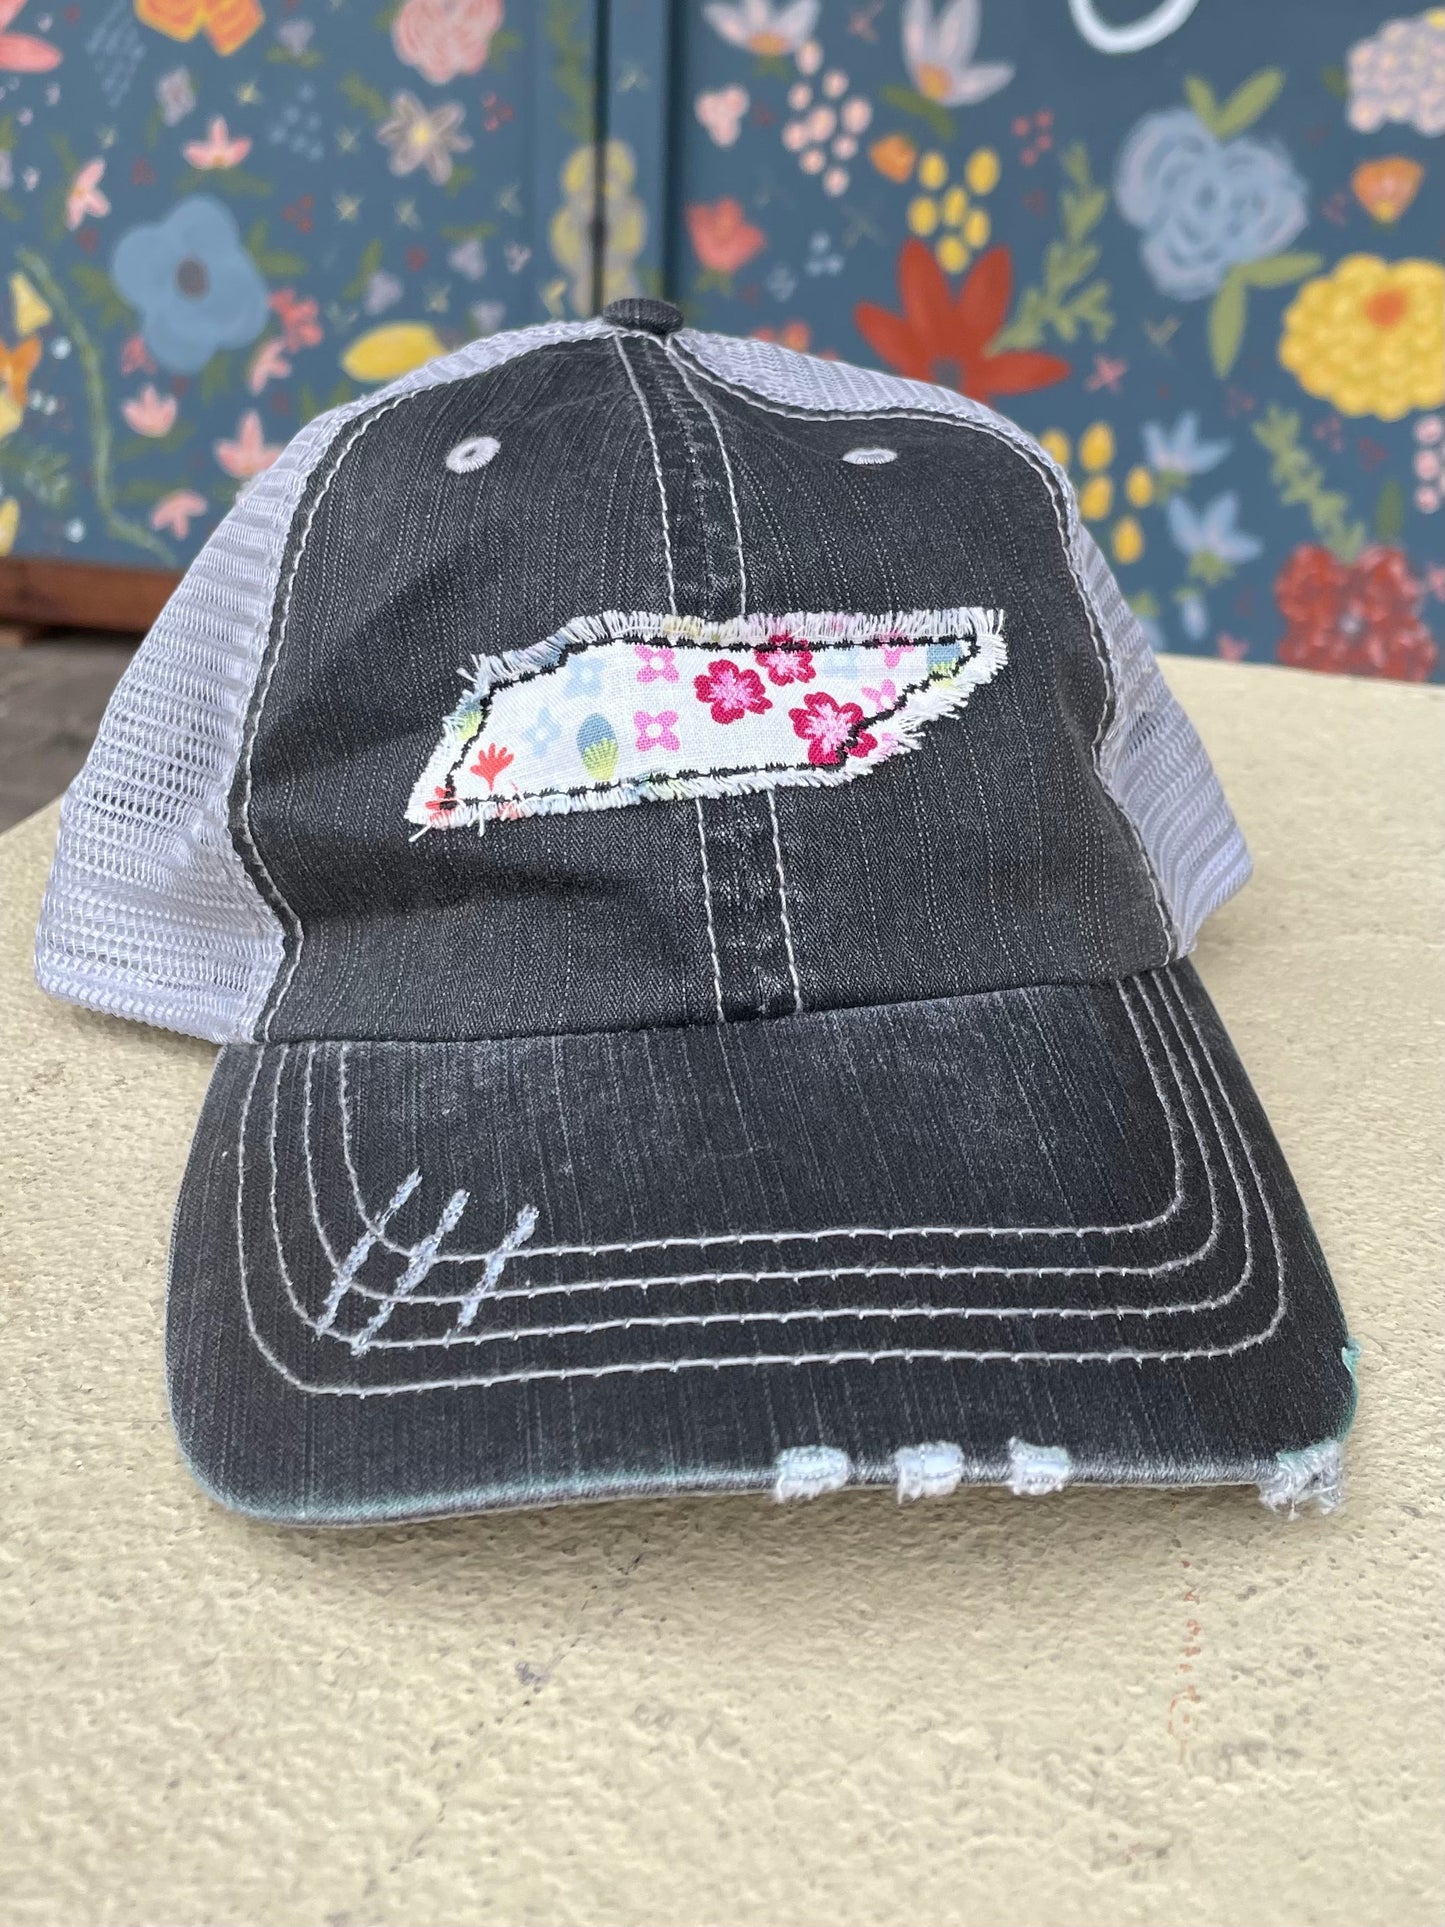 Tennessee Embroidered Emblem with Print Distressed Hat-Apparel > Apparel & Accessories > Clothing Accessories > Hats-Gray Hat with Flower Print-Quinn's Mercantile